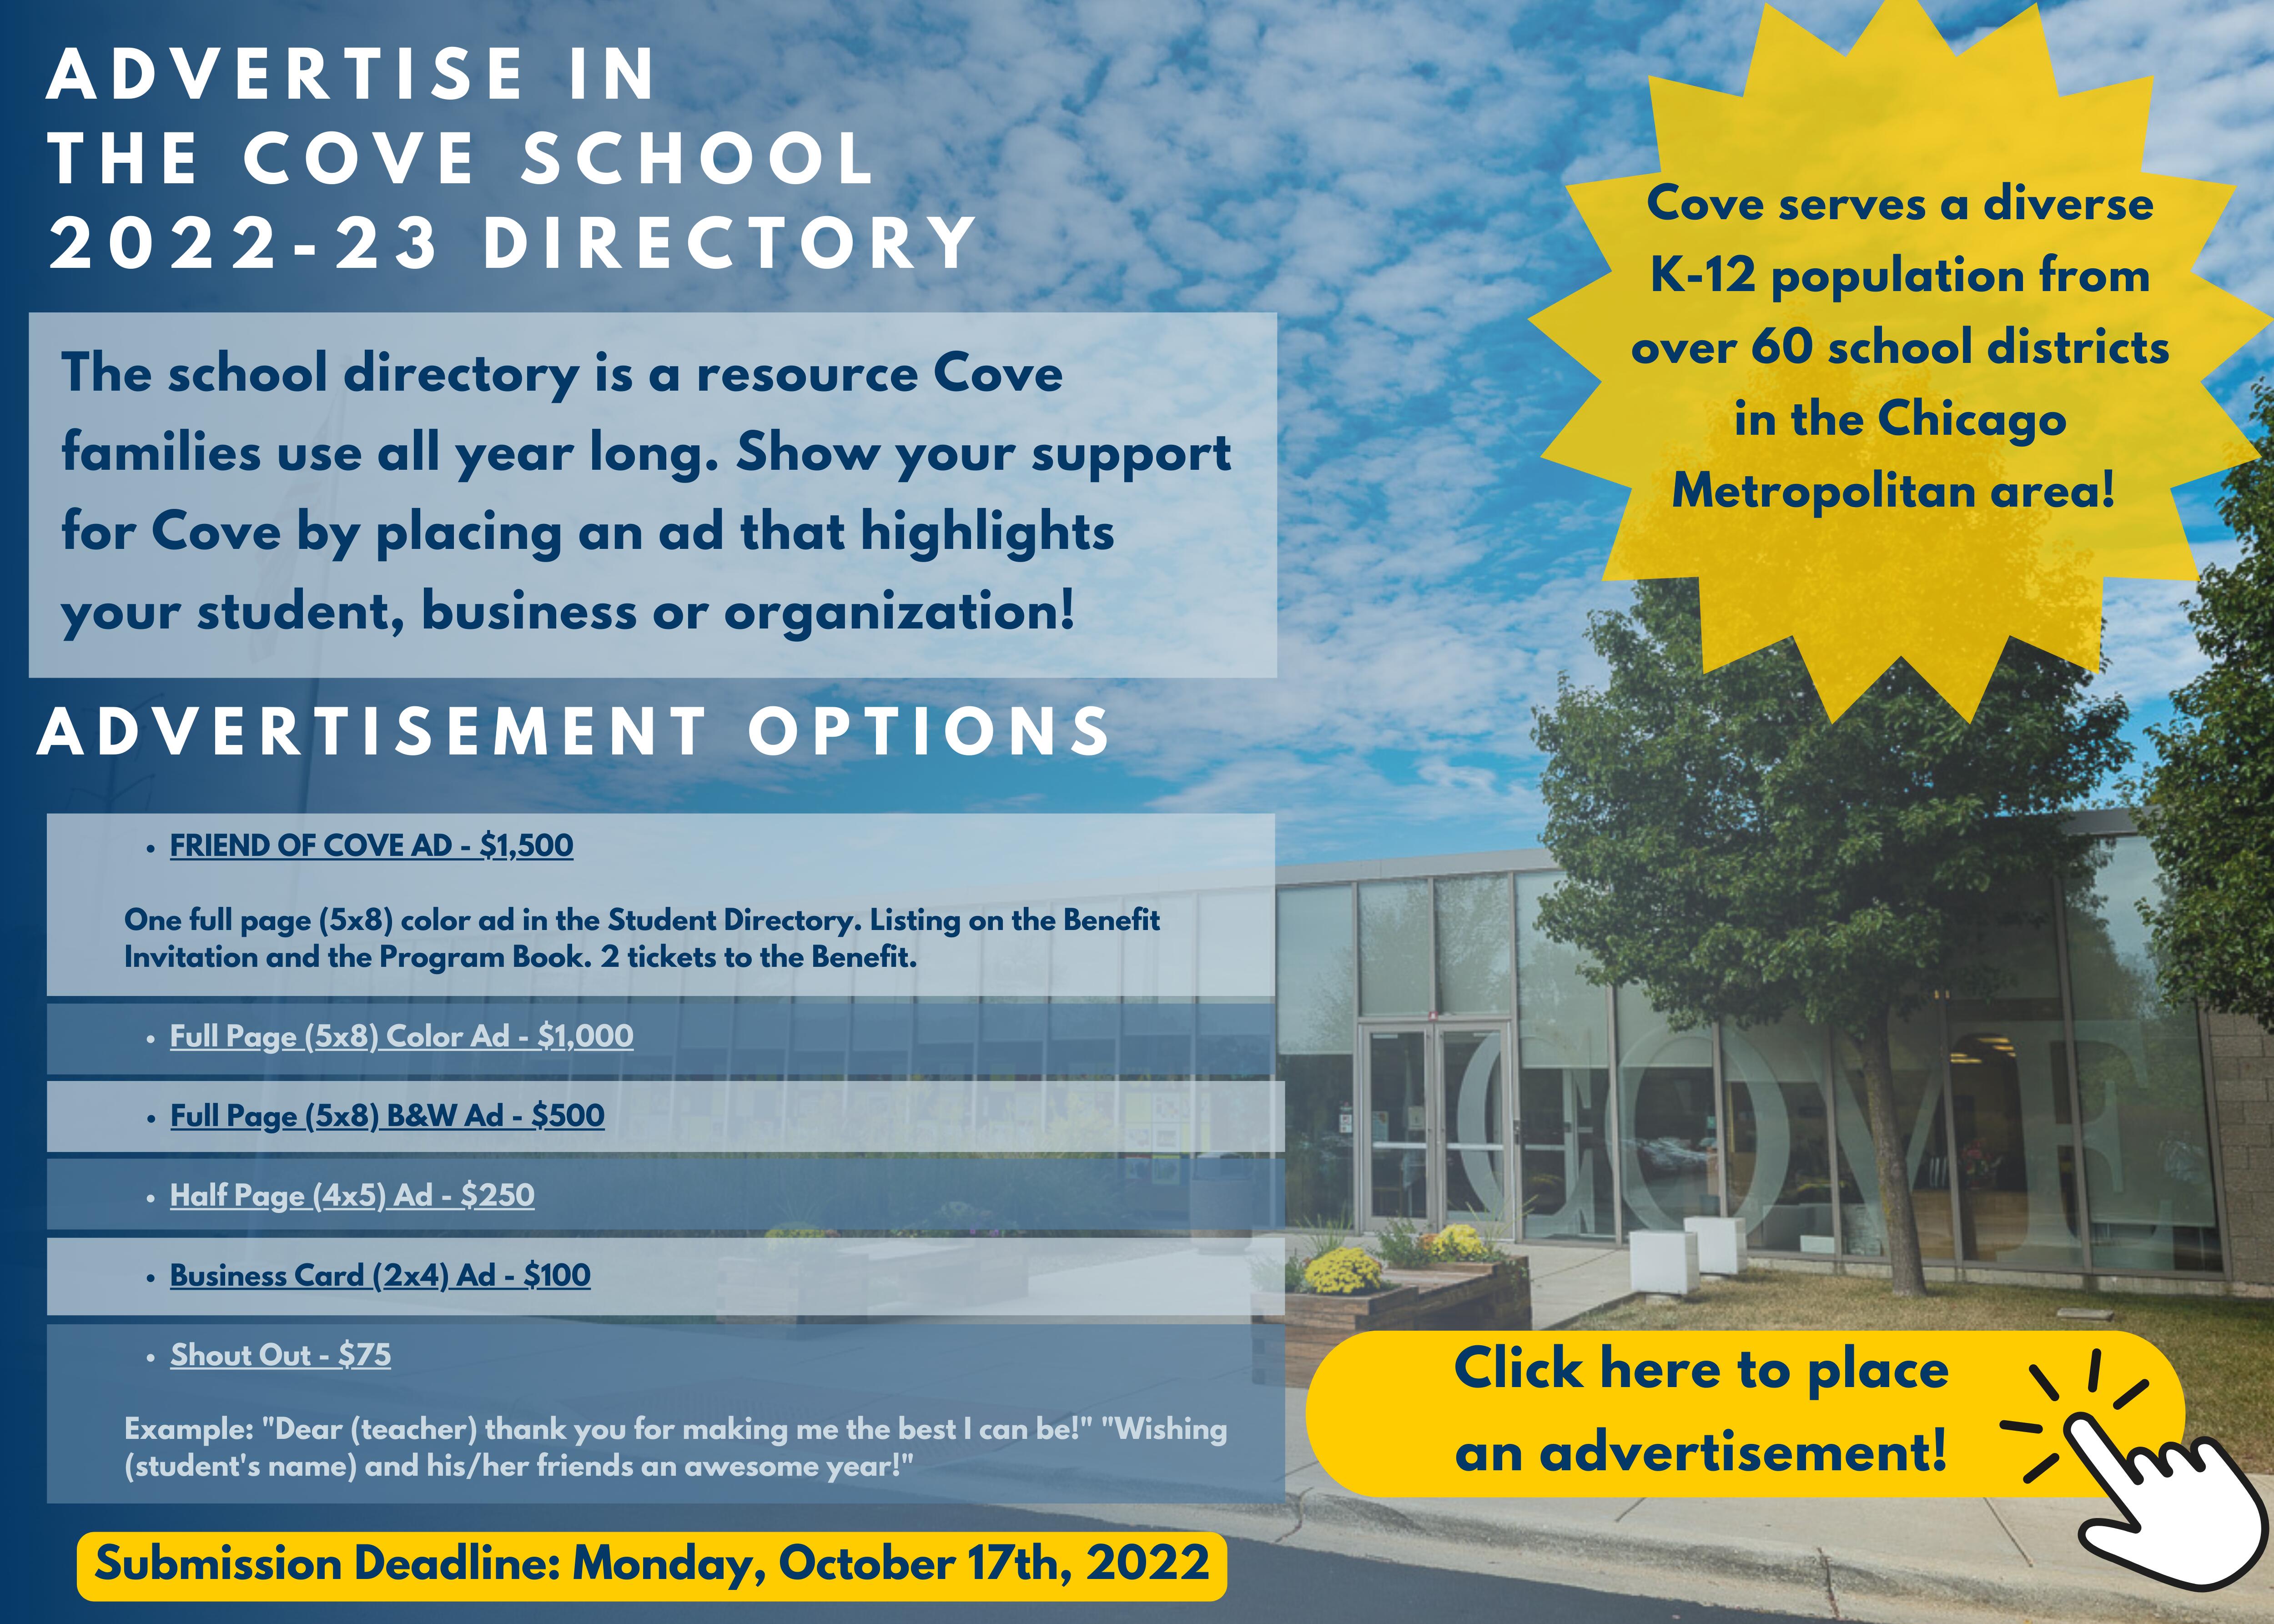 Advertising options in the 2022-23 School Directory